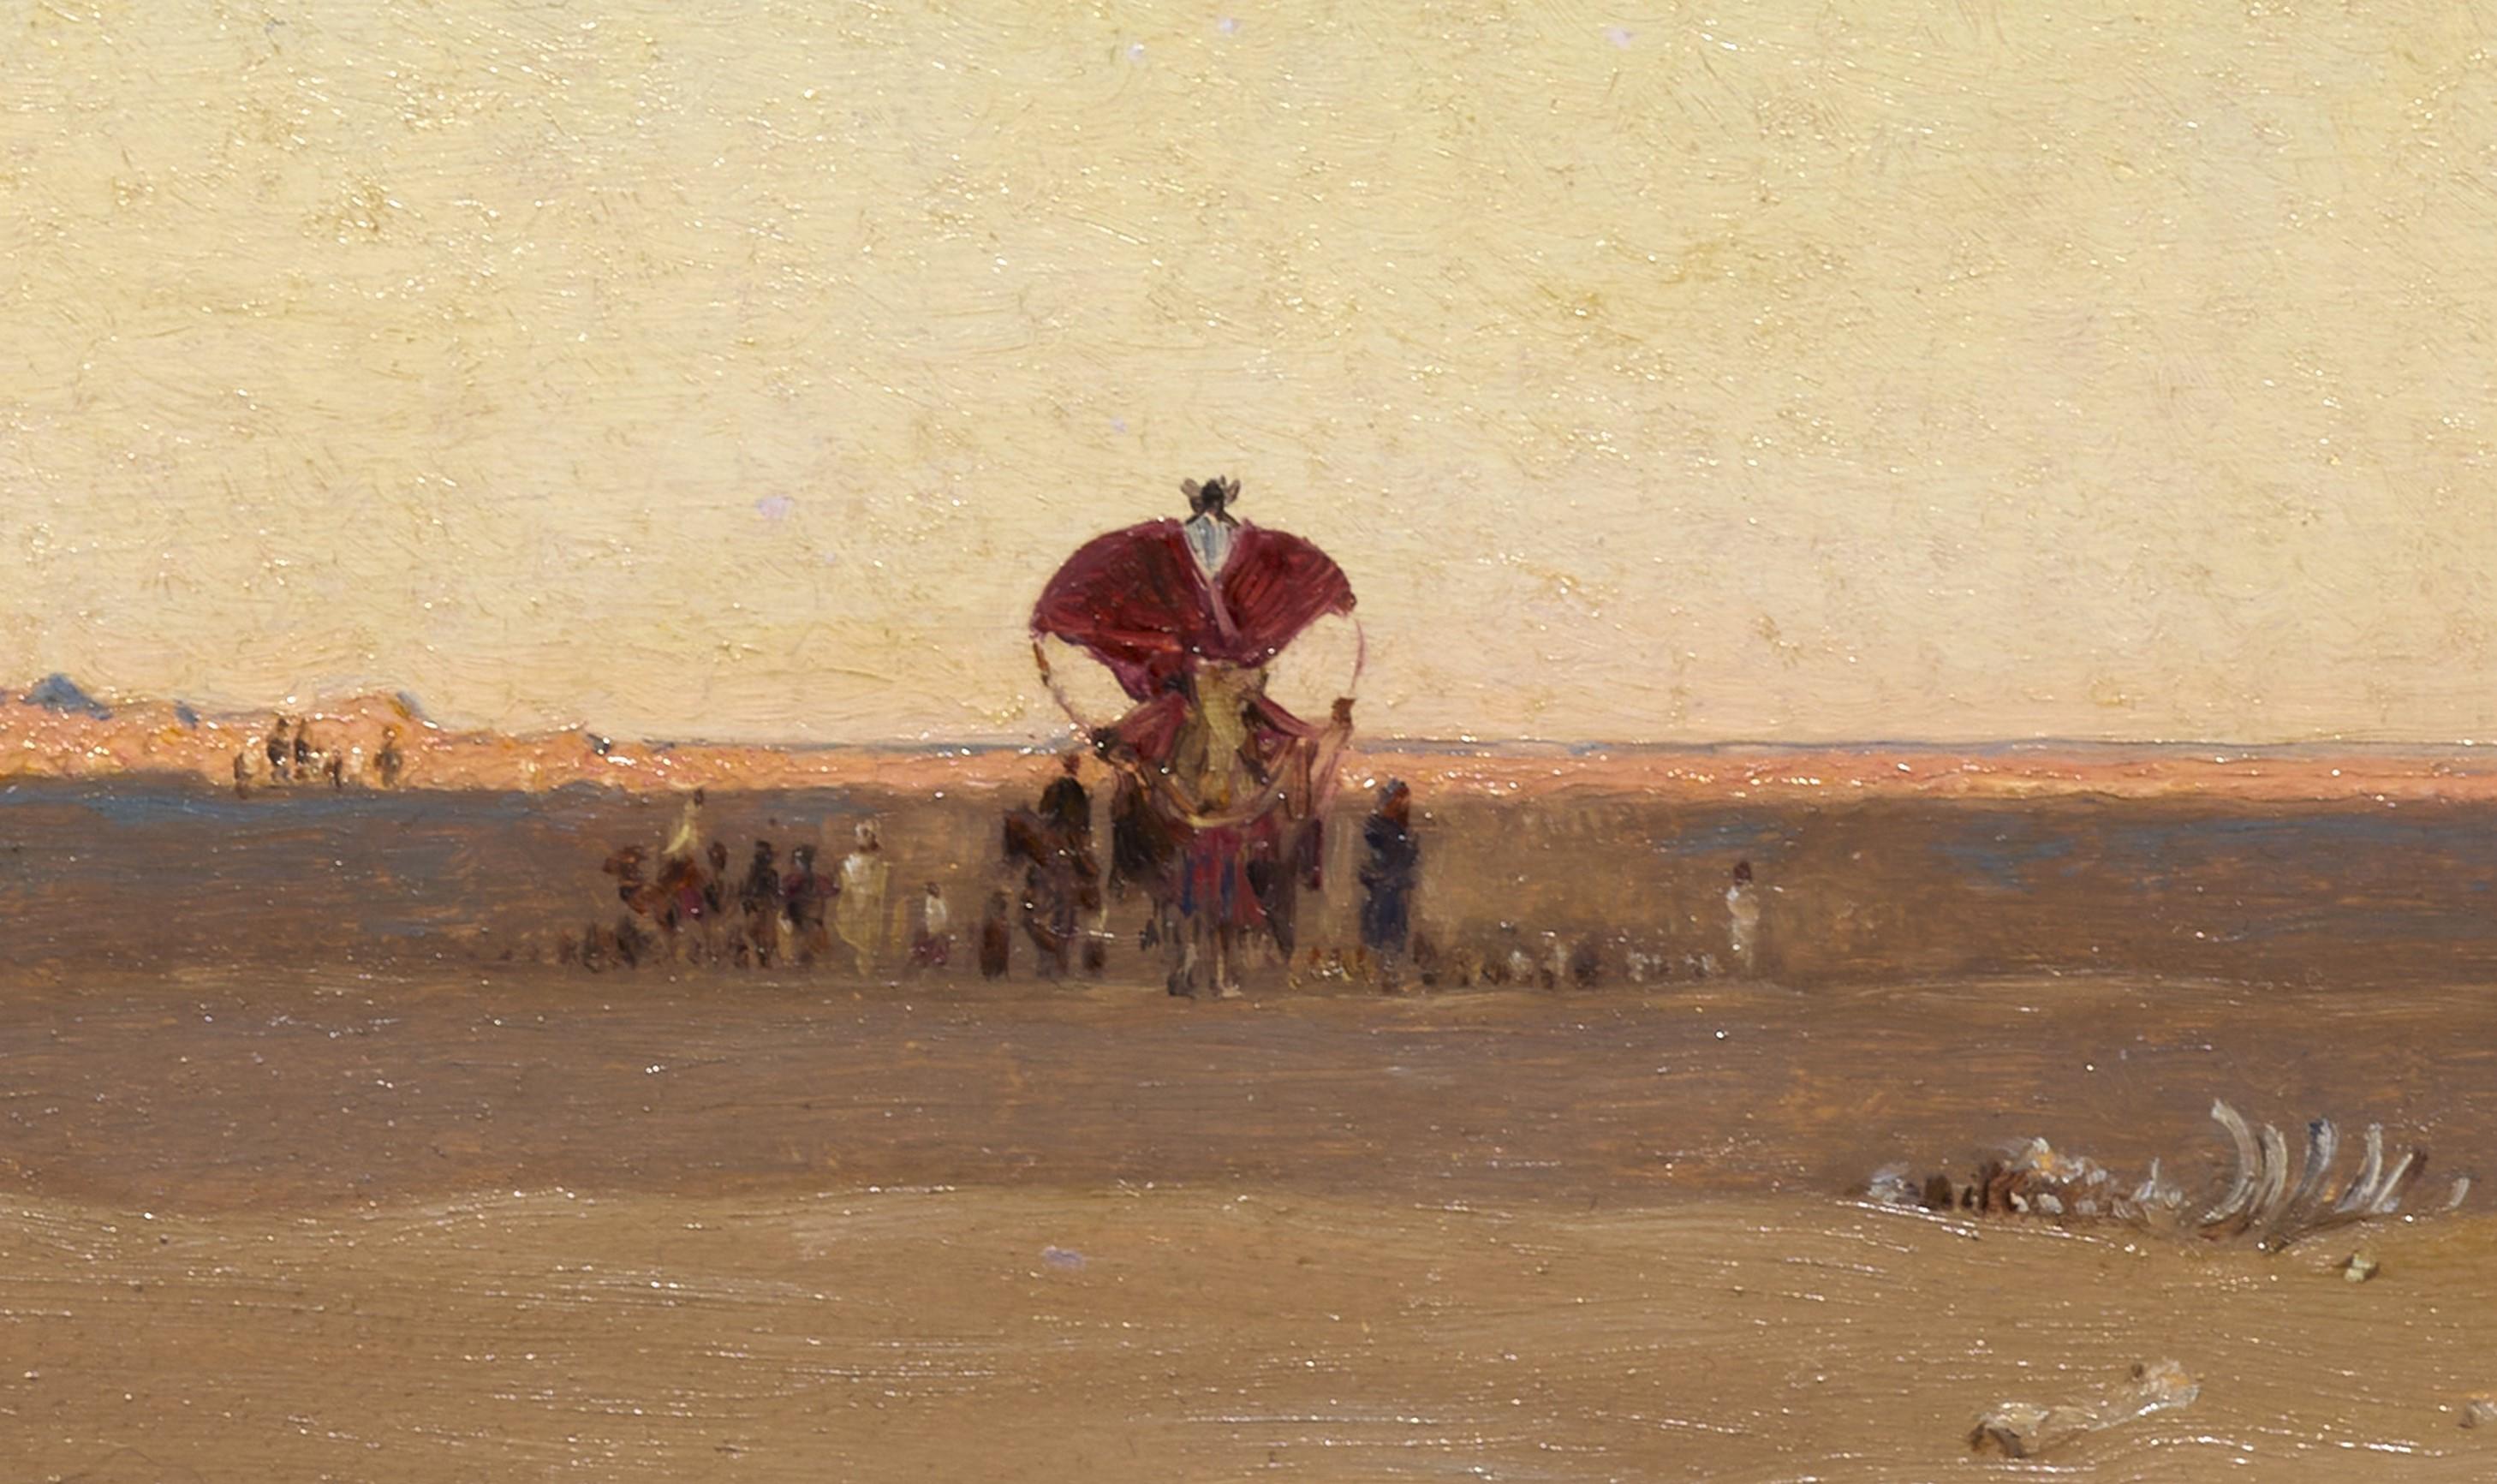 Caravan in the Desert, a painting by Gustave Guillaumet (1840 - 1887) 2